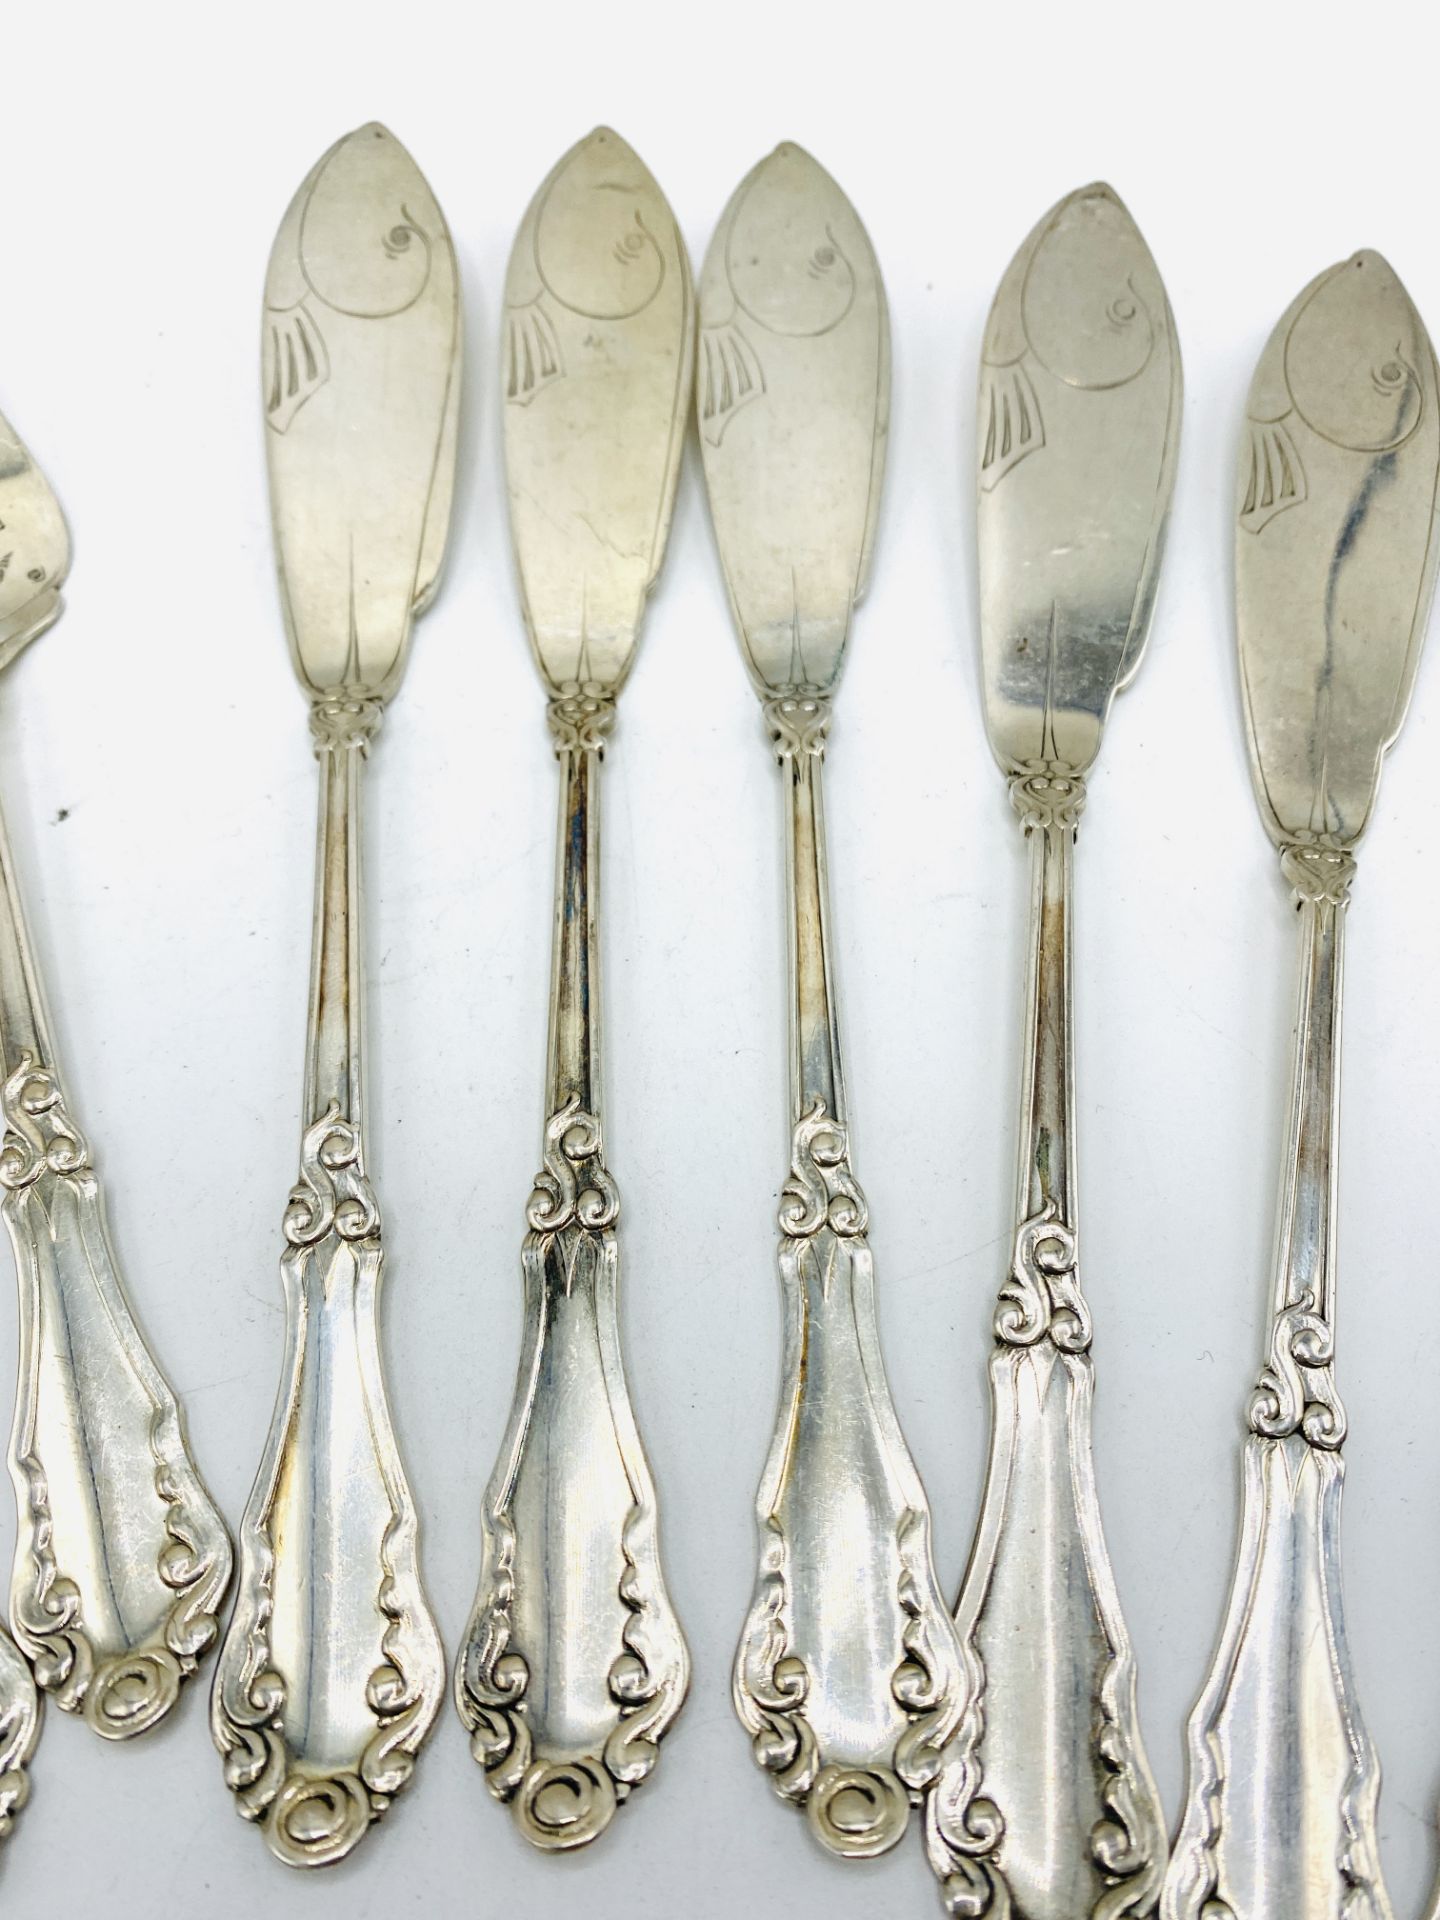 8 piece silver fish cutlery setting by Peter Hertz Of Denmark - Image 5 of 6